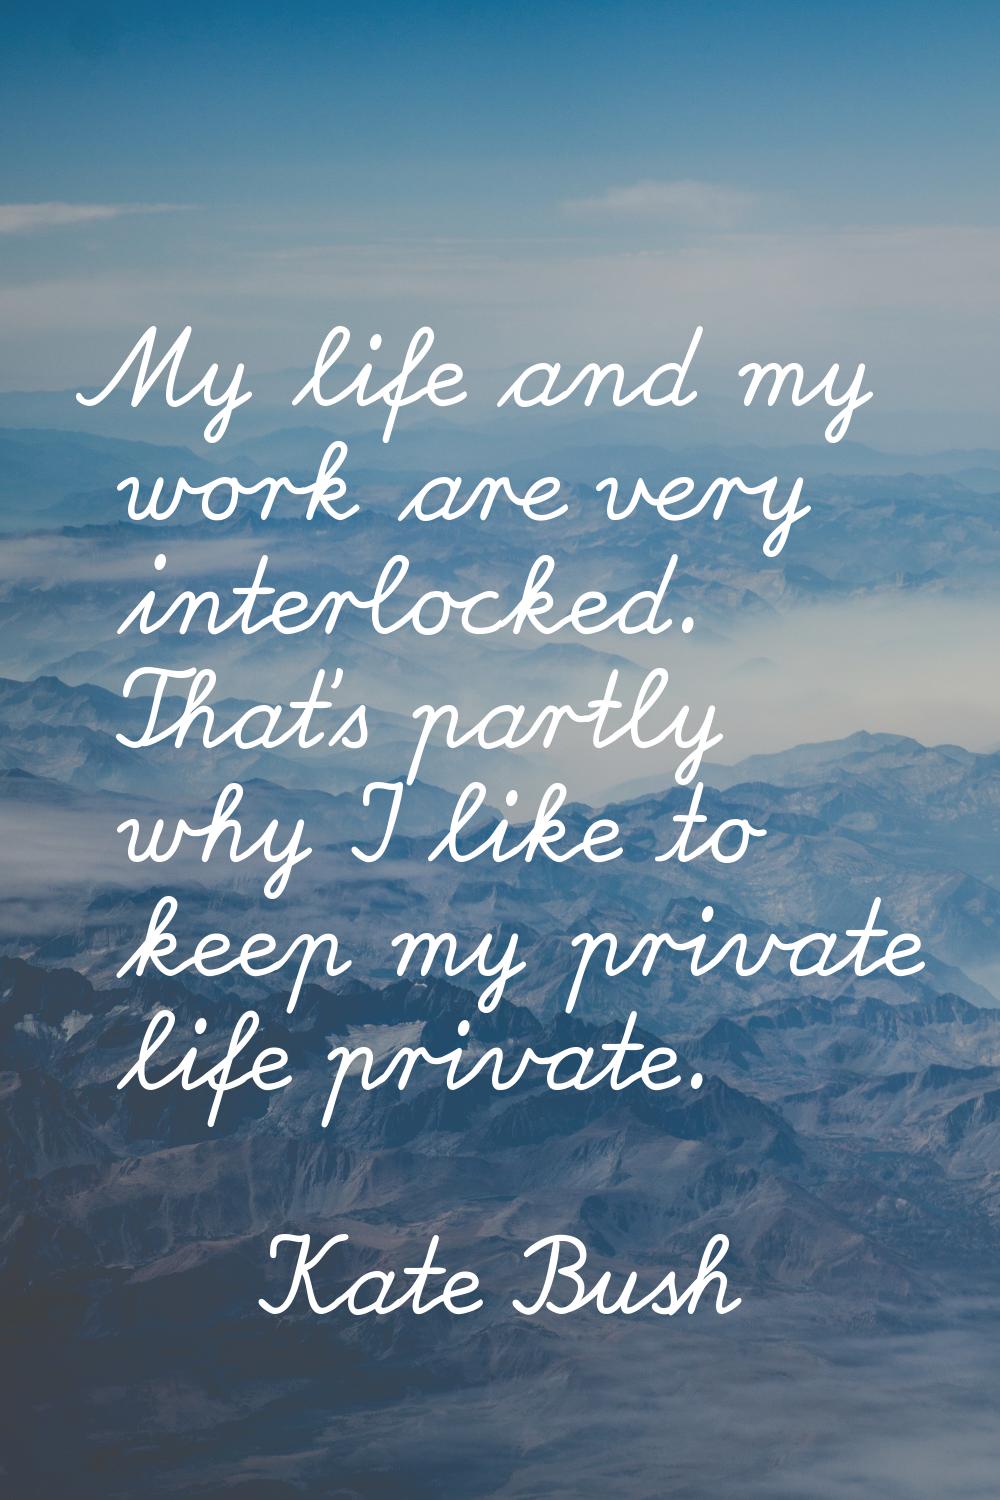 My life and my work are very interlocked. That's partly why I like to keep my private life private.